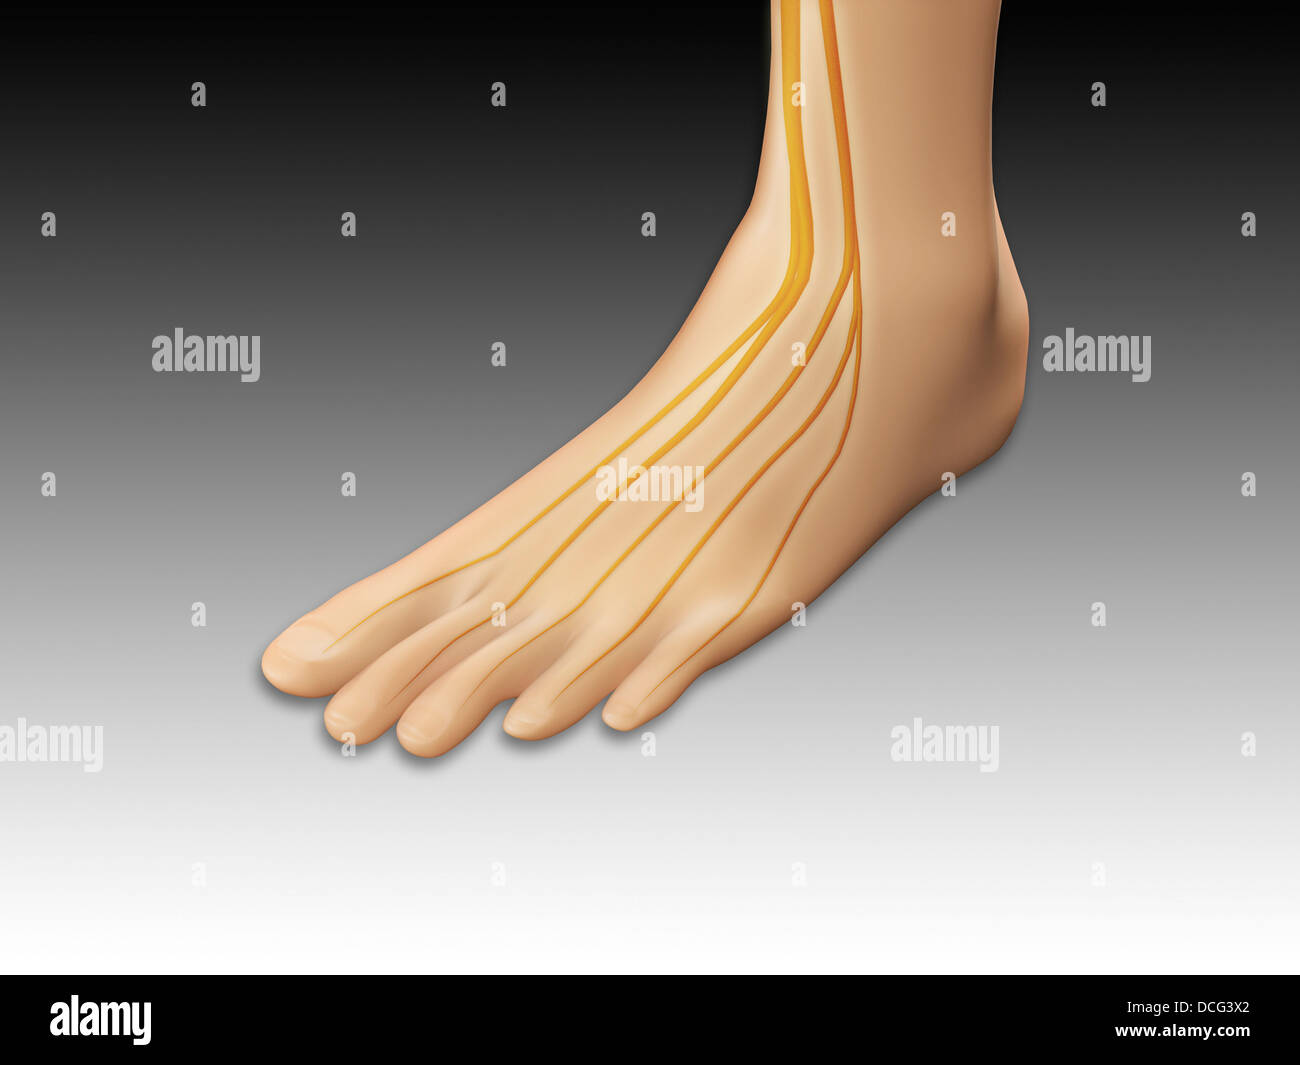 Conceptual image of human foot with nervous system. Stock Photo